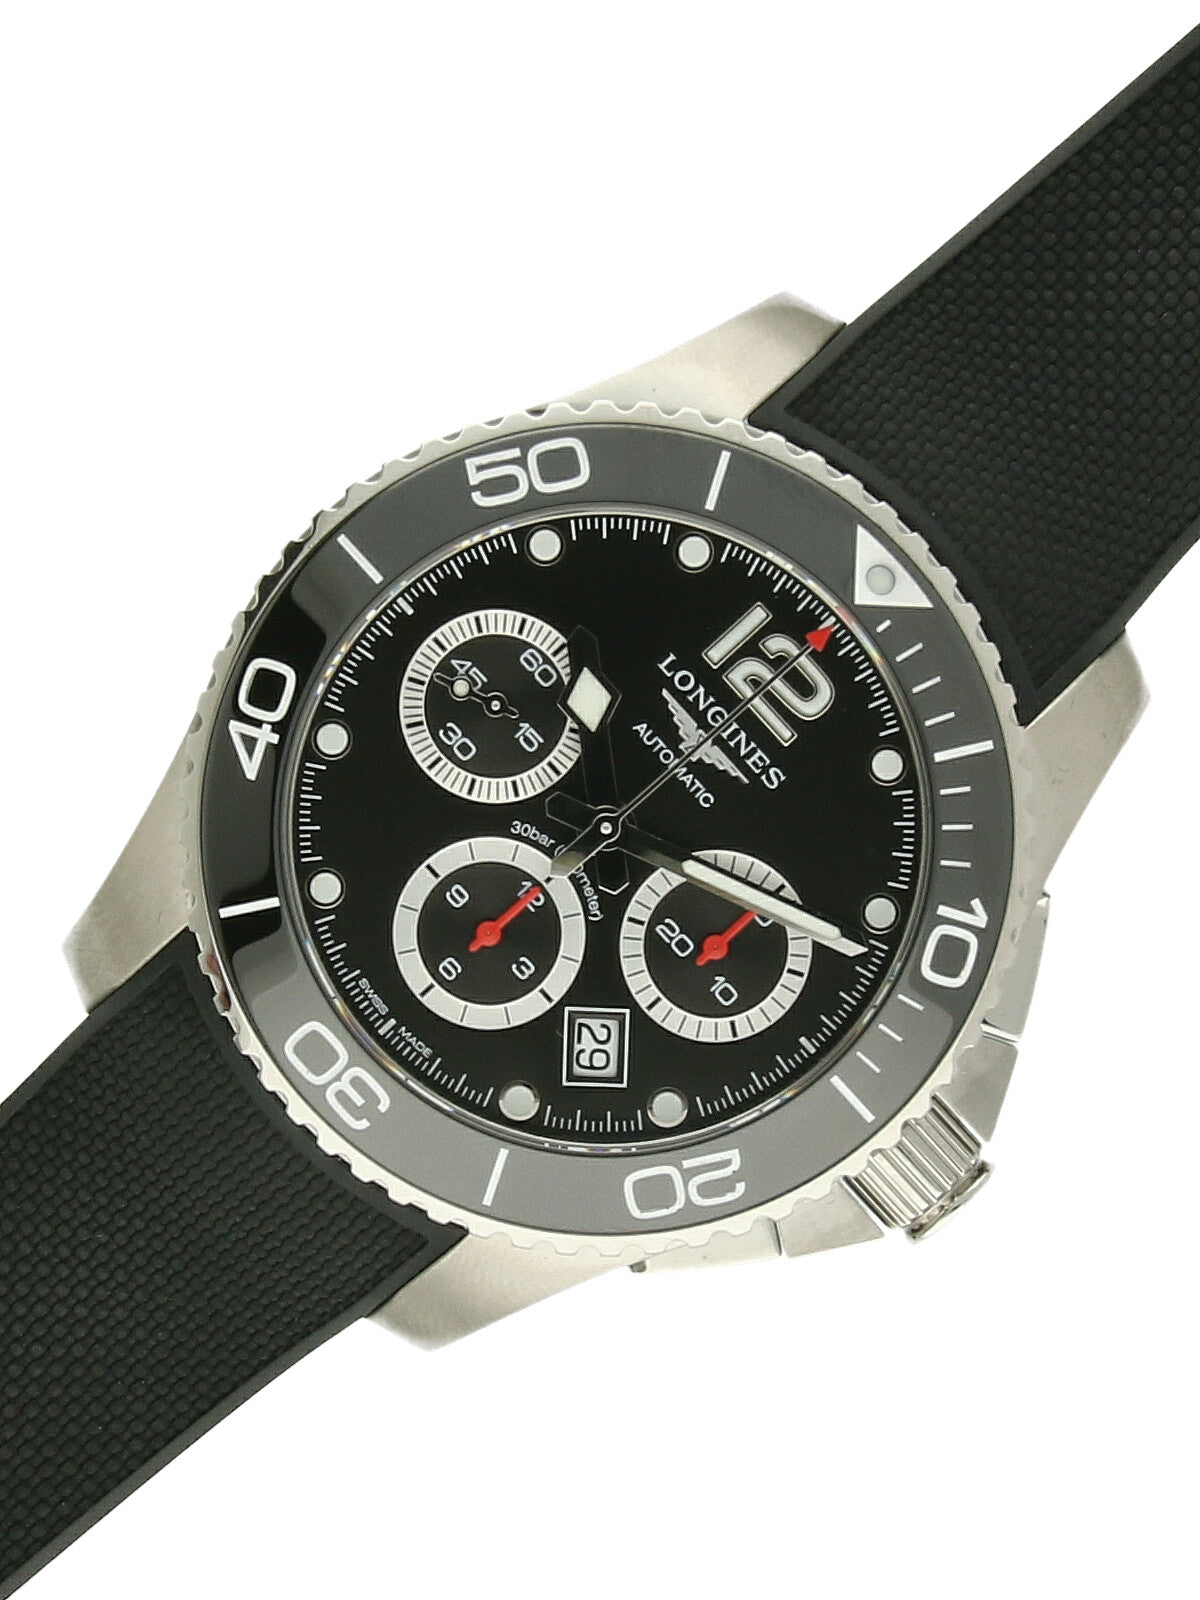 Pre Owned Longines Hydro Conquest Steel Automatic 43mm Watch on Black Rubber Strap